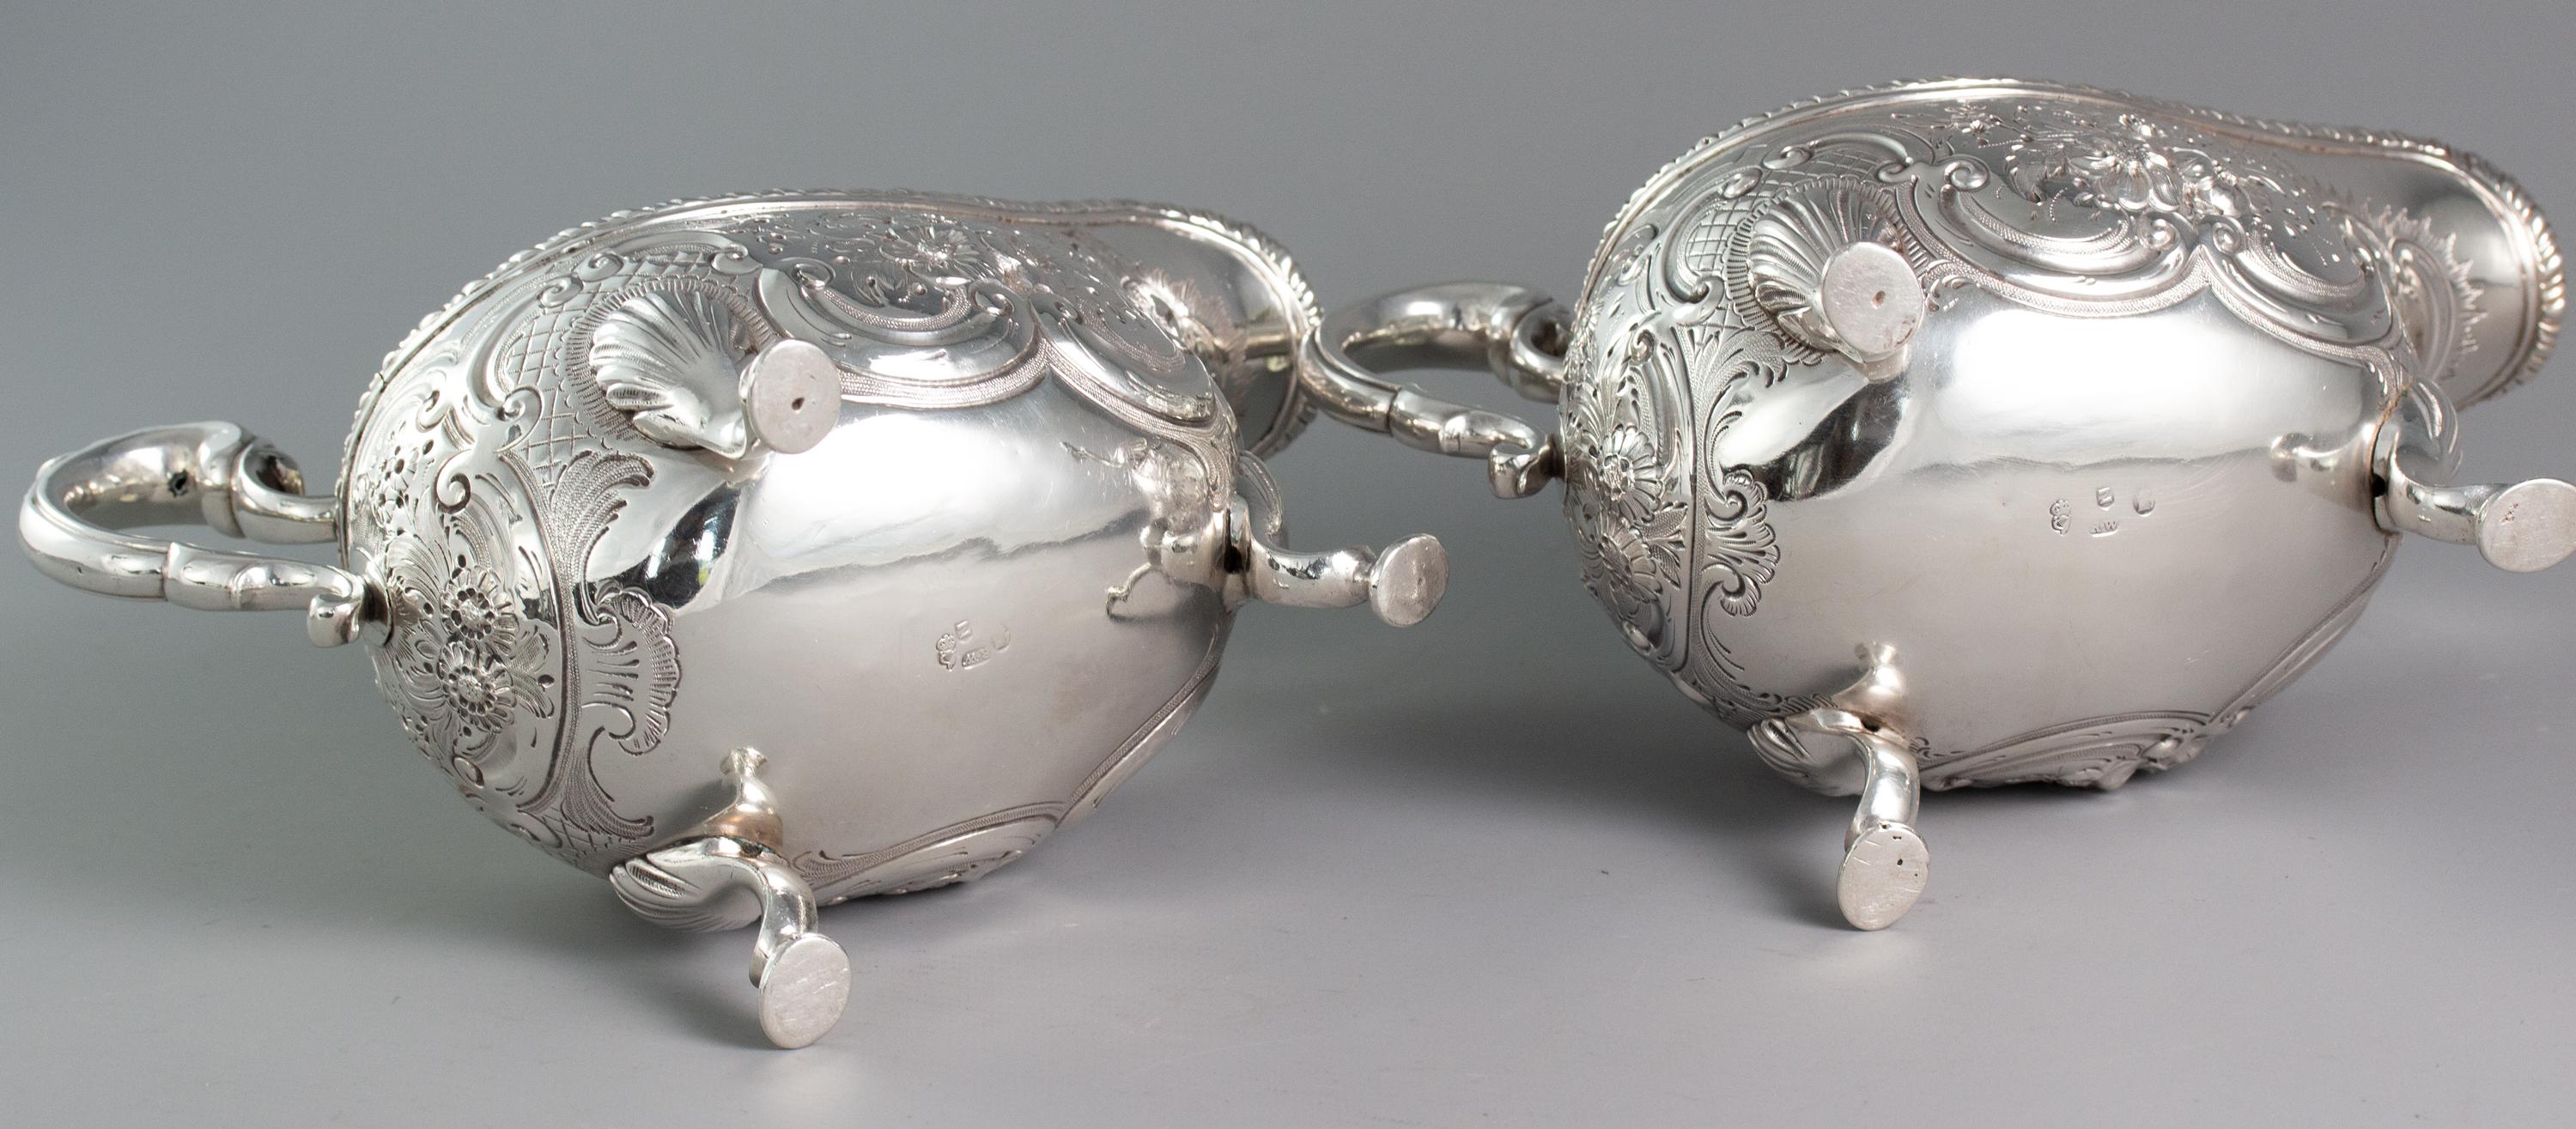 Rare Pair of Irish Silver Sauce Boats Dublin 1772 by Richard Williams For Sale 7